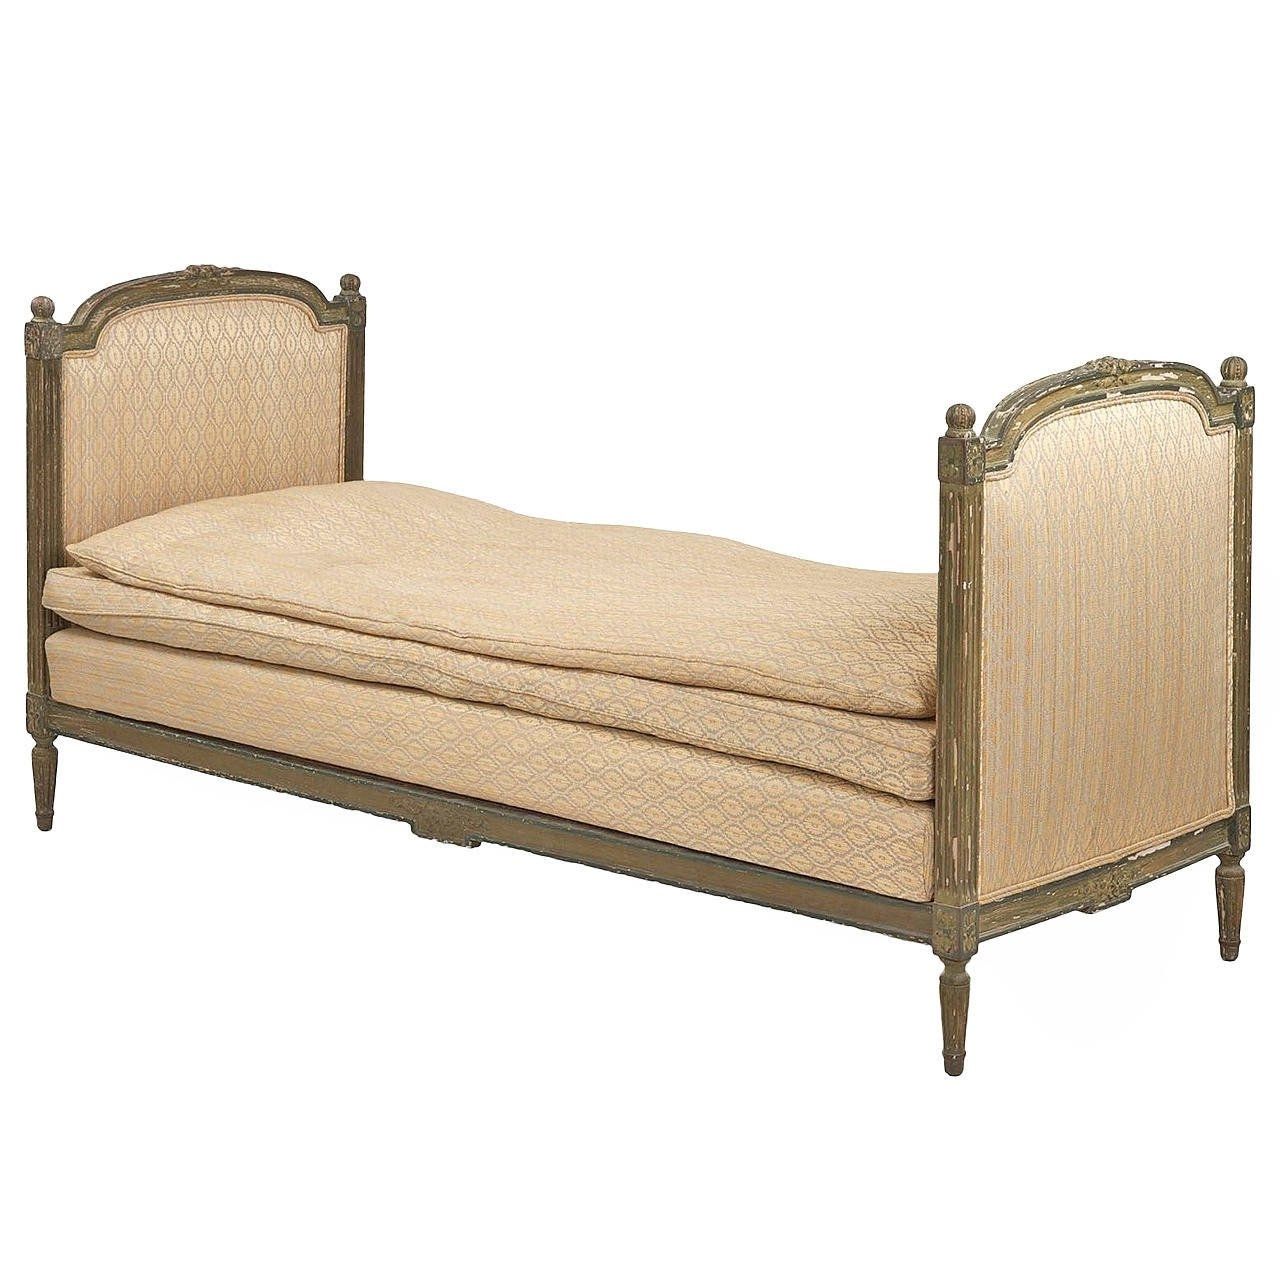 Widely Used Daybed Chaises Throughout 19th Century French Louis Xvi Style Antique Daybed Chaise Settee (View 12 of 15)